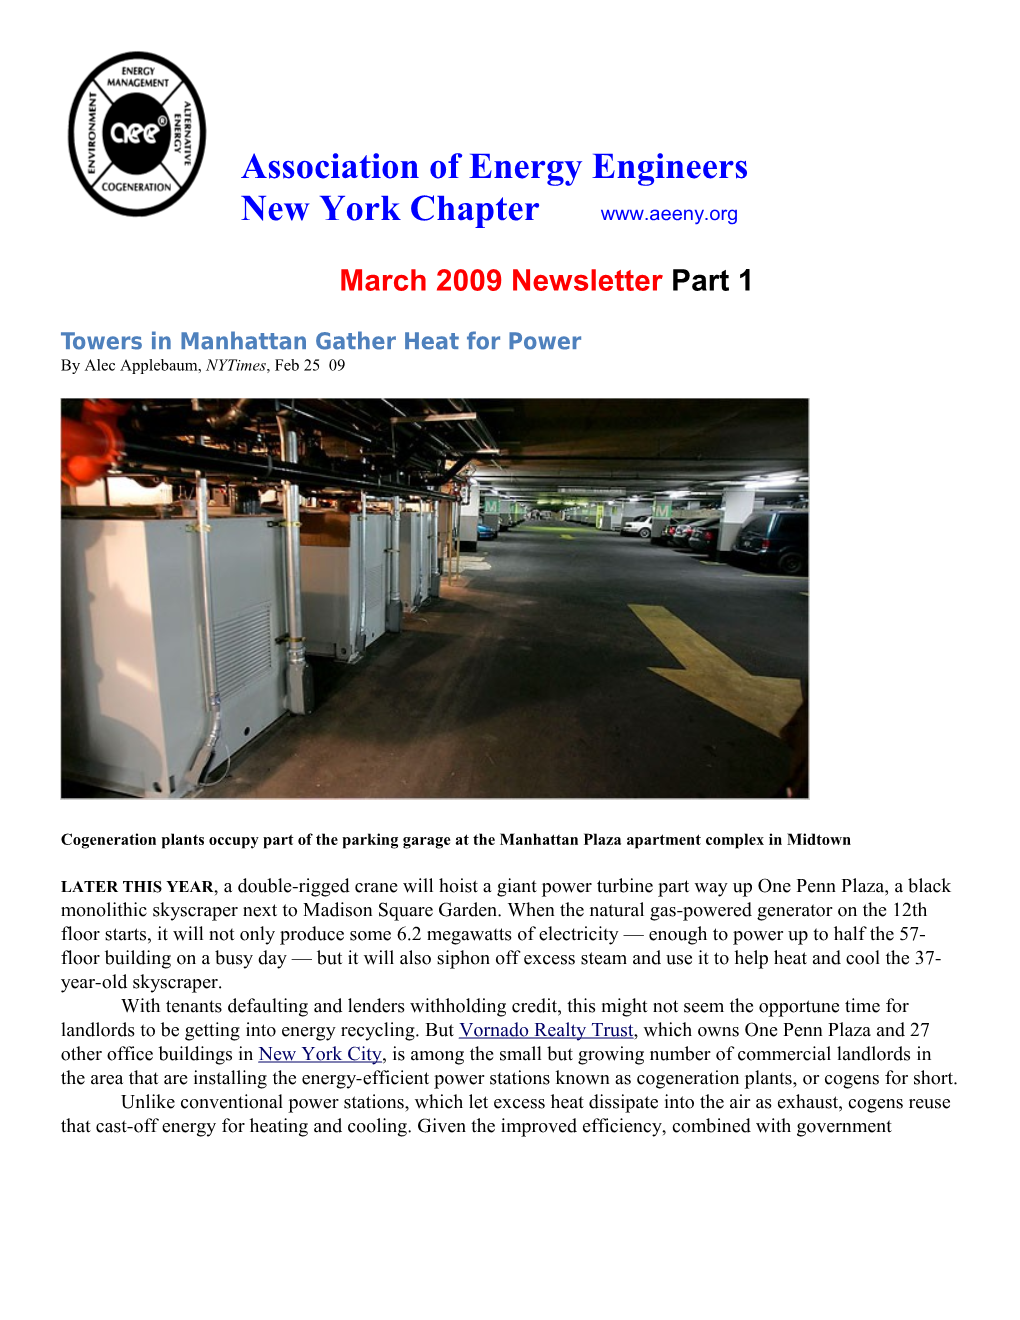 Towers in Manhattan Gather Heat for Power